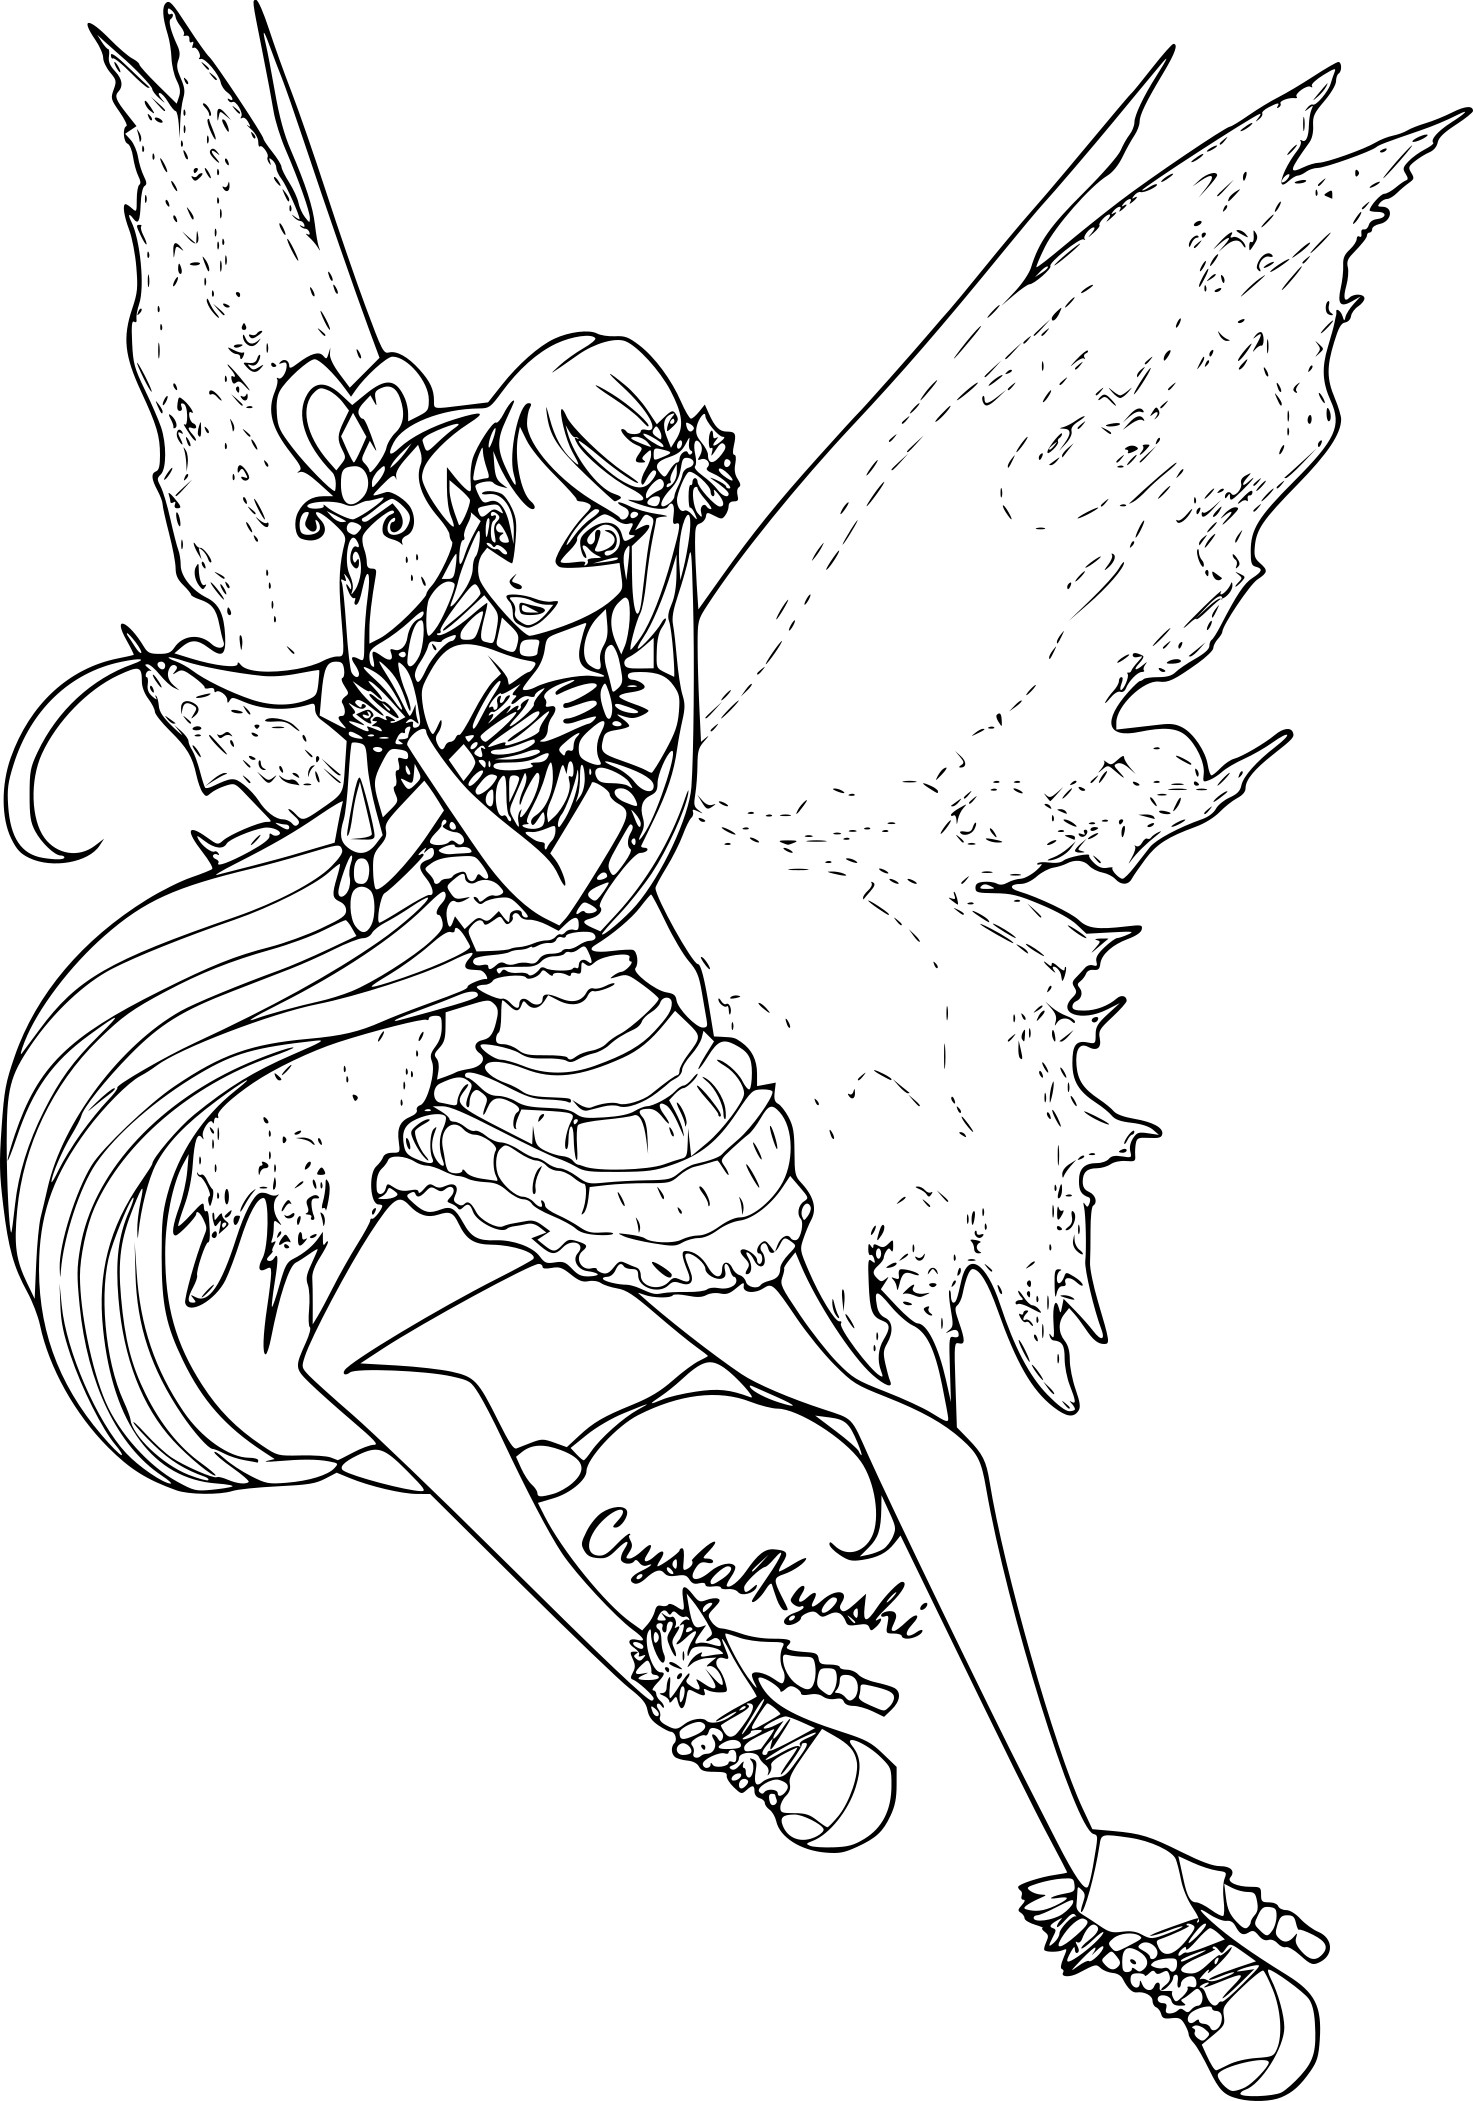 Luxe Dessin A Colorier Winx Bloom - Mademoiselleosaki destiné Dessin A Colorier Winx 